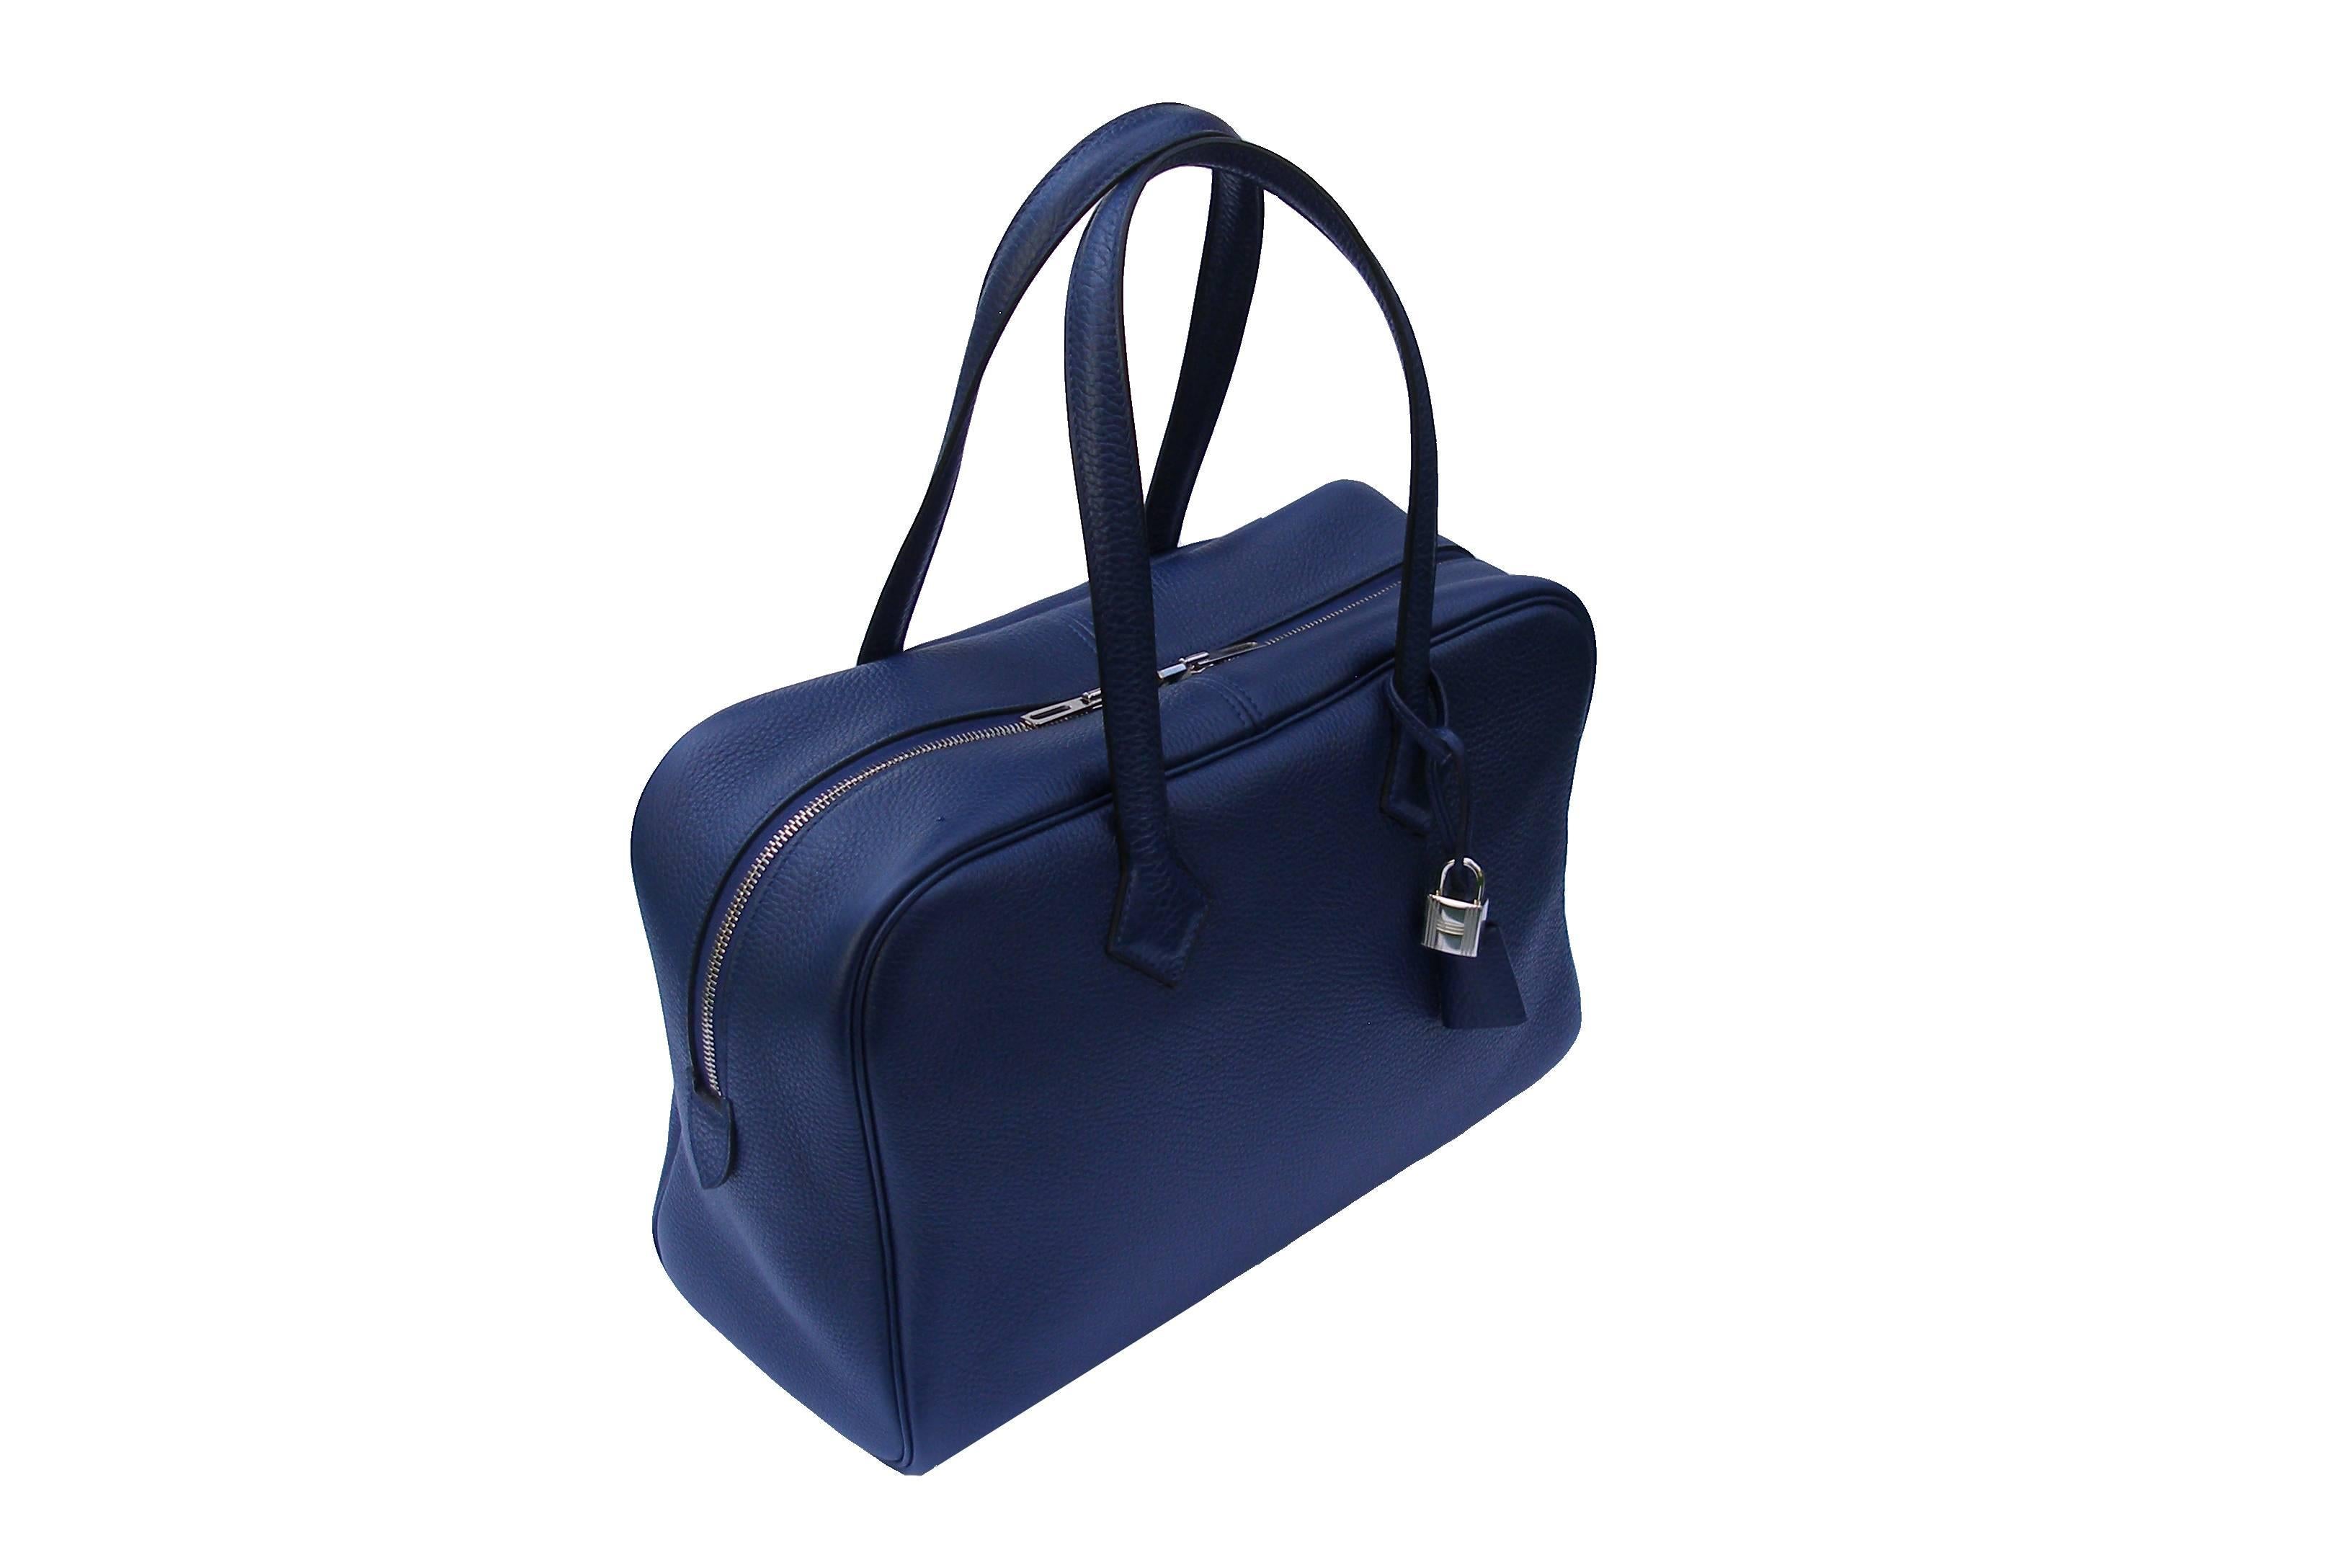 Impossible to find in this color BLEU SAPHIR 
Genuine 35cm Hermès Victoria II bag.  Featured in SAPHIR  Blue Clemence leather with palladium hardware.  Clemence leather is for those who prefers a less structured, slouchy feel.  The blind stamp